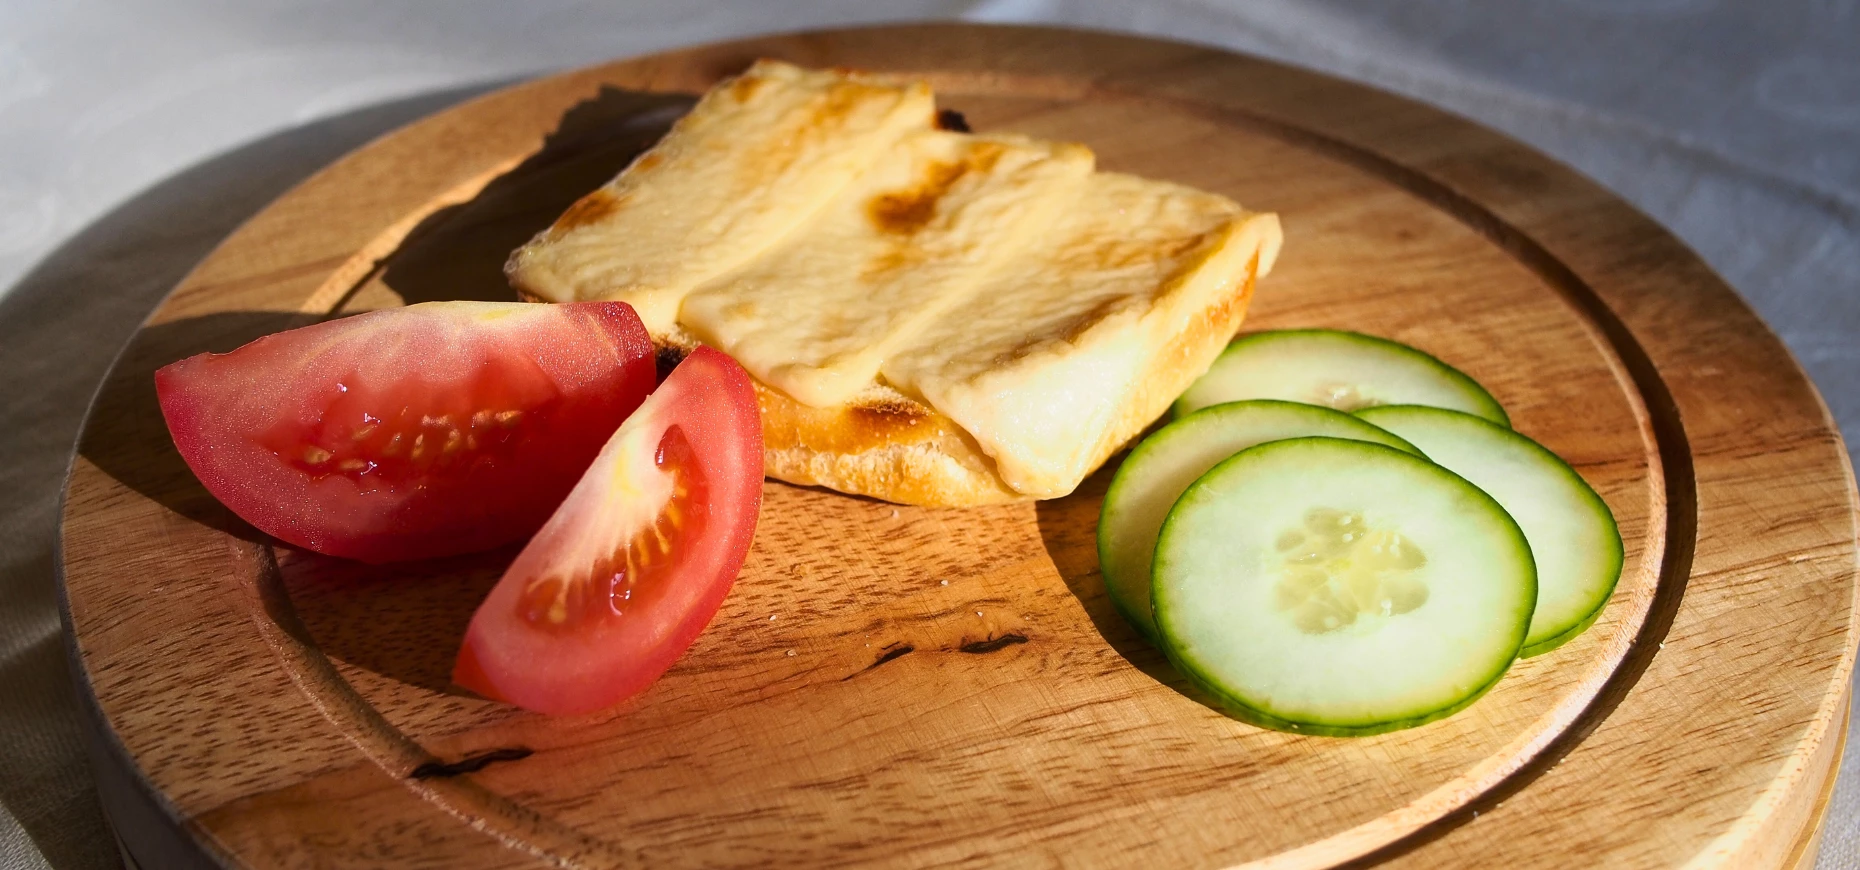 Slices of plant-based cheese sat upon a wooden board with tomatoes and cucumber.